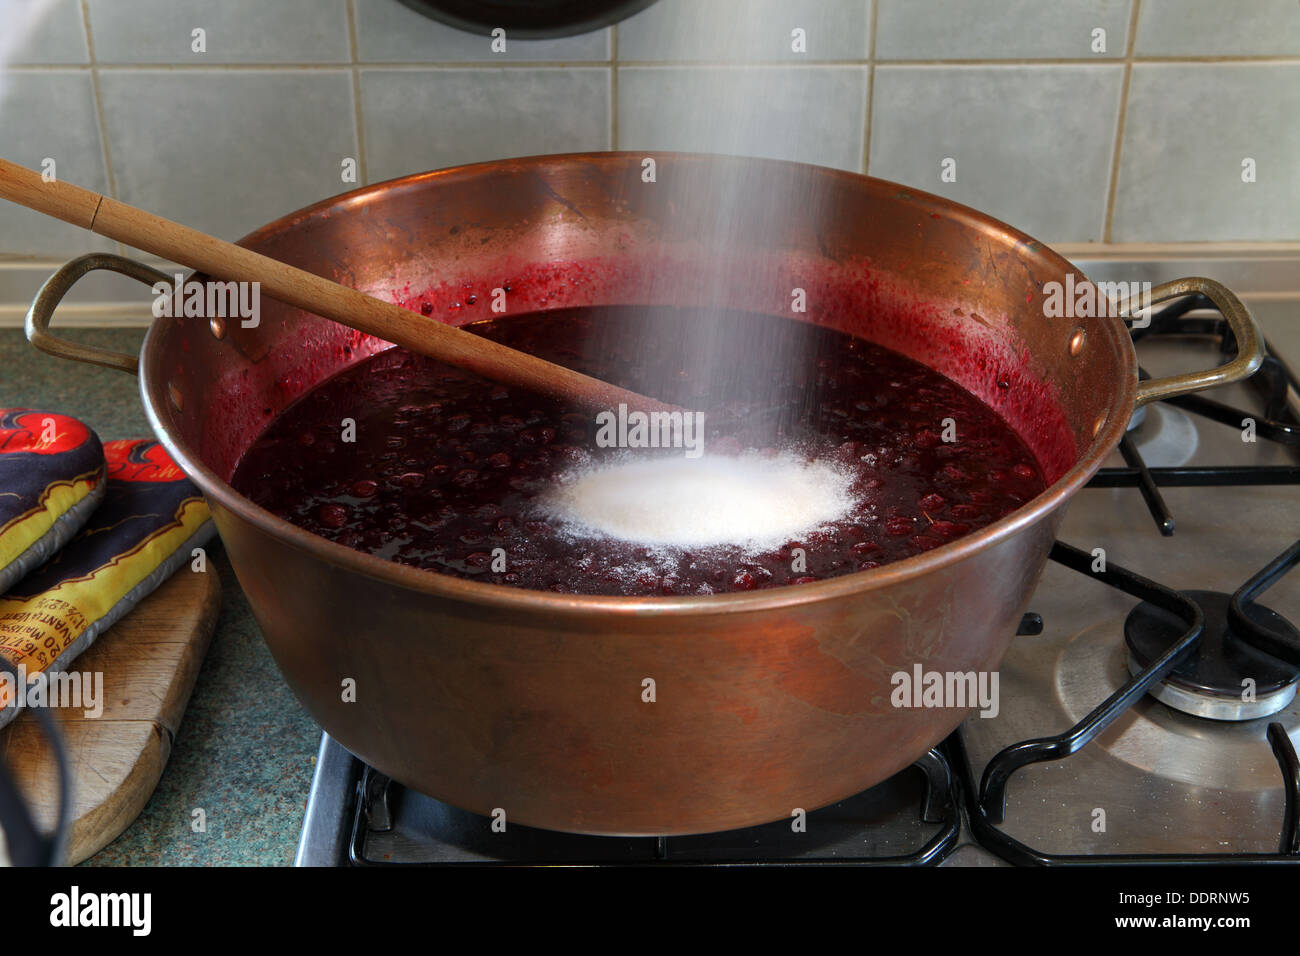 Preserving sugar being poured into a pan with fruit for jam making Stock Photo